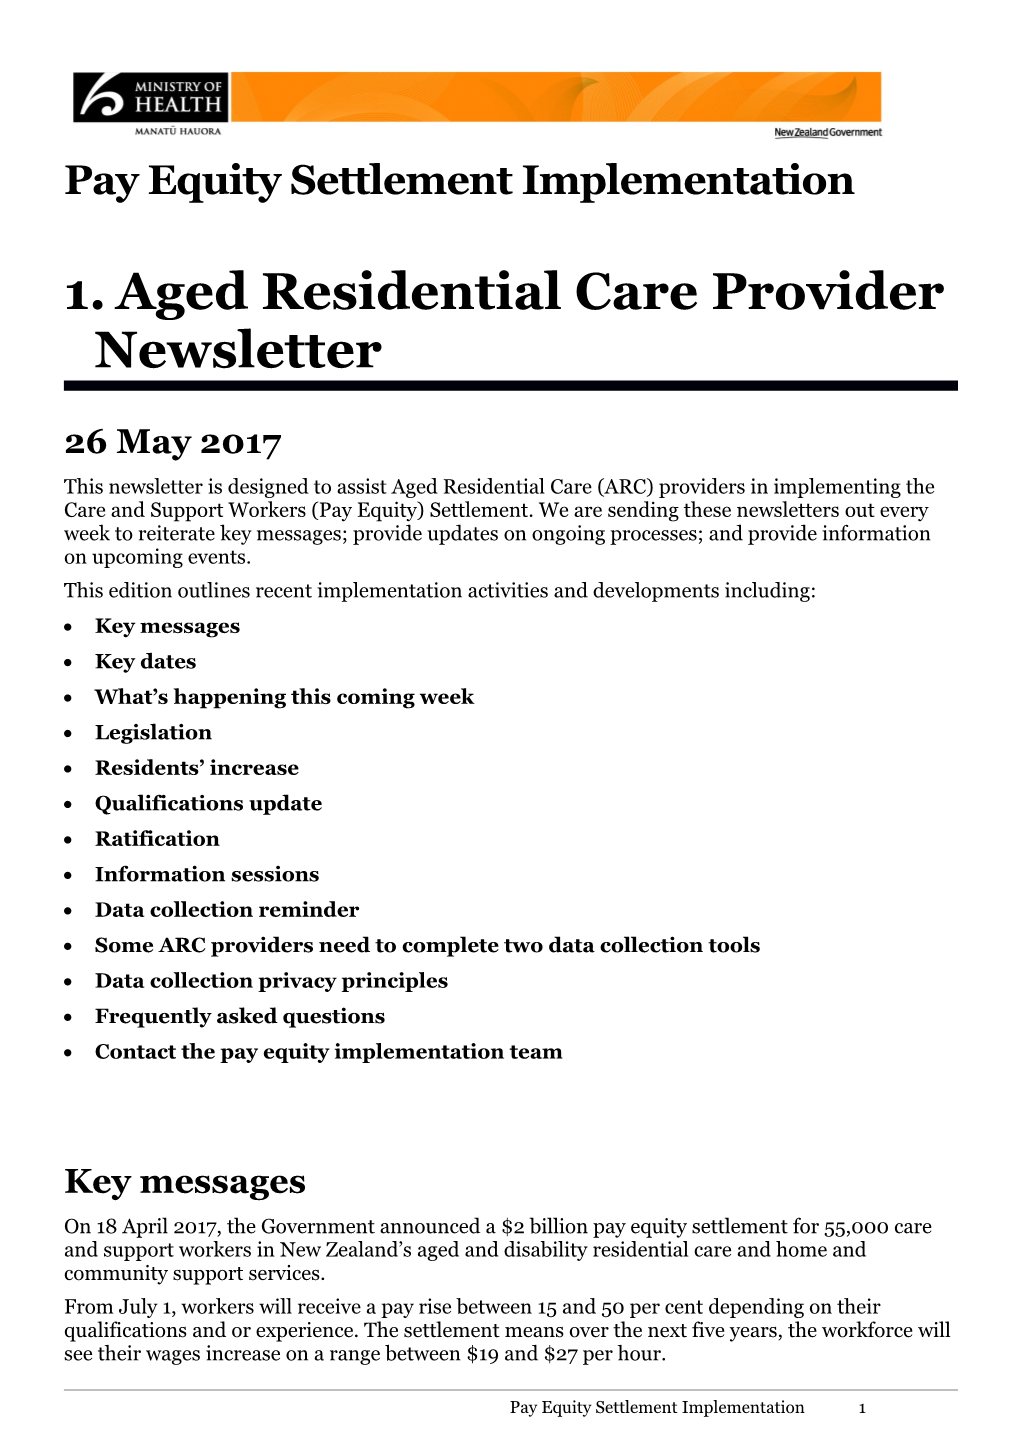 Aged Residential Care Provider Newsletter: 26 May 2017